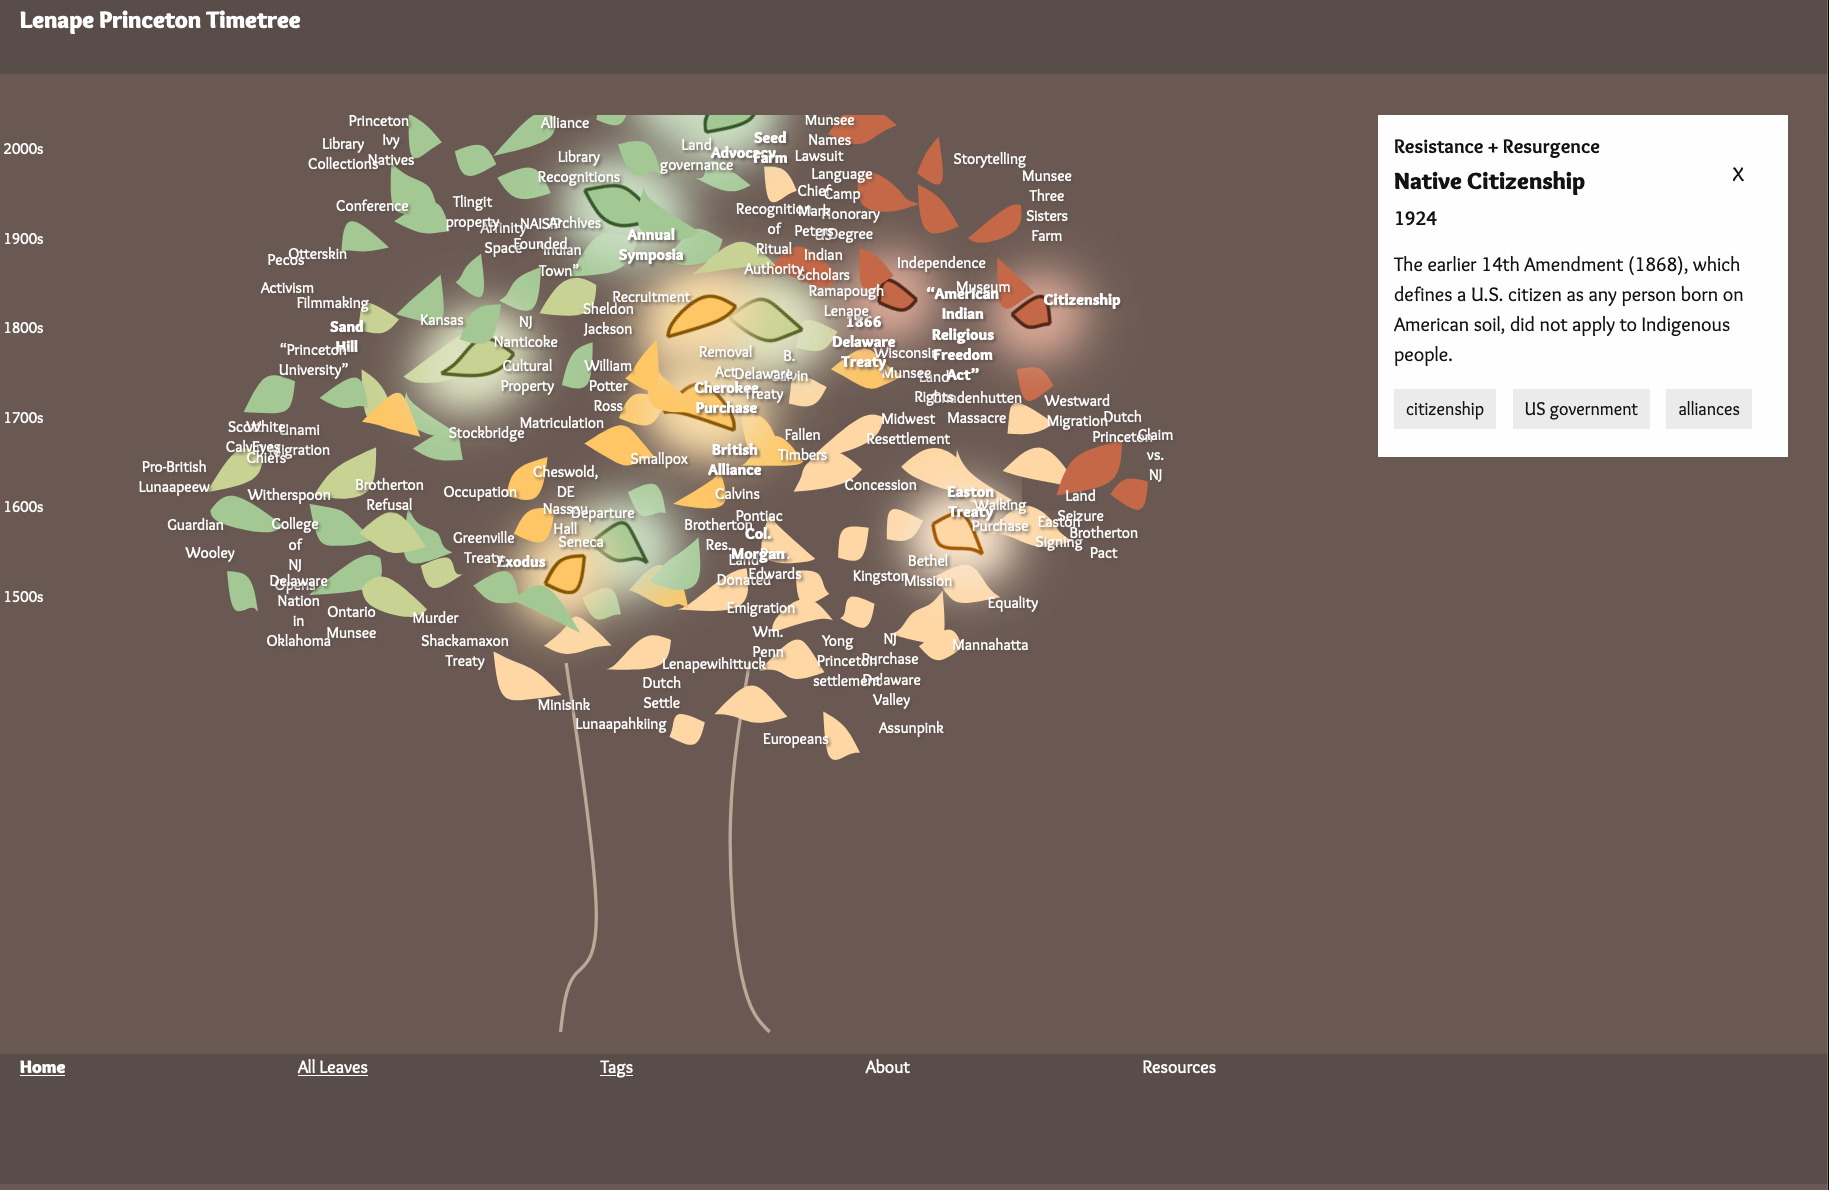 Screenshot of the Lenape Timetree showing active leaf style